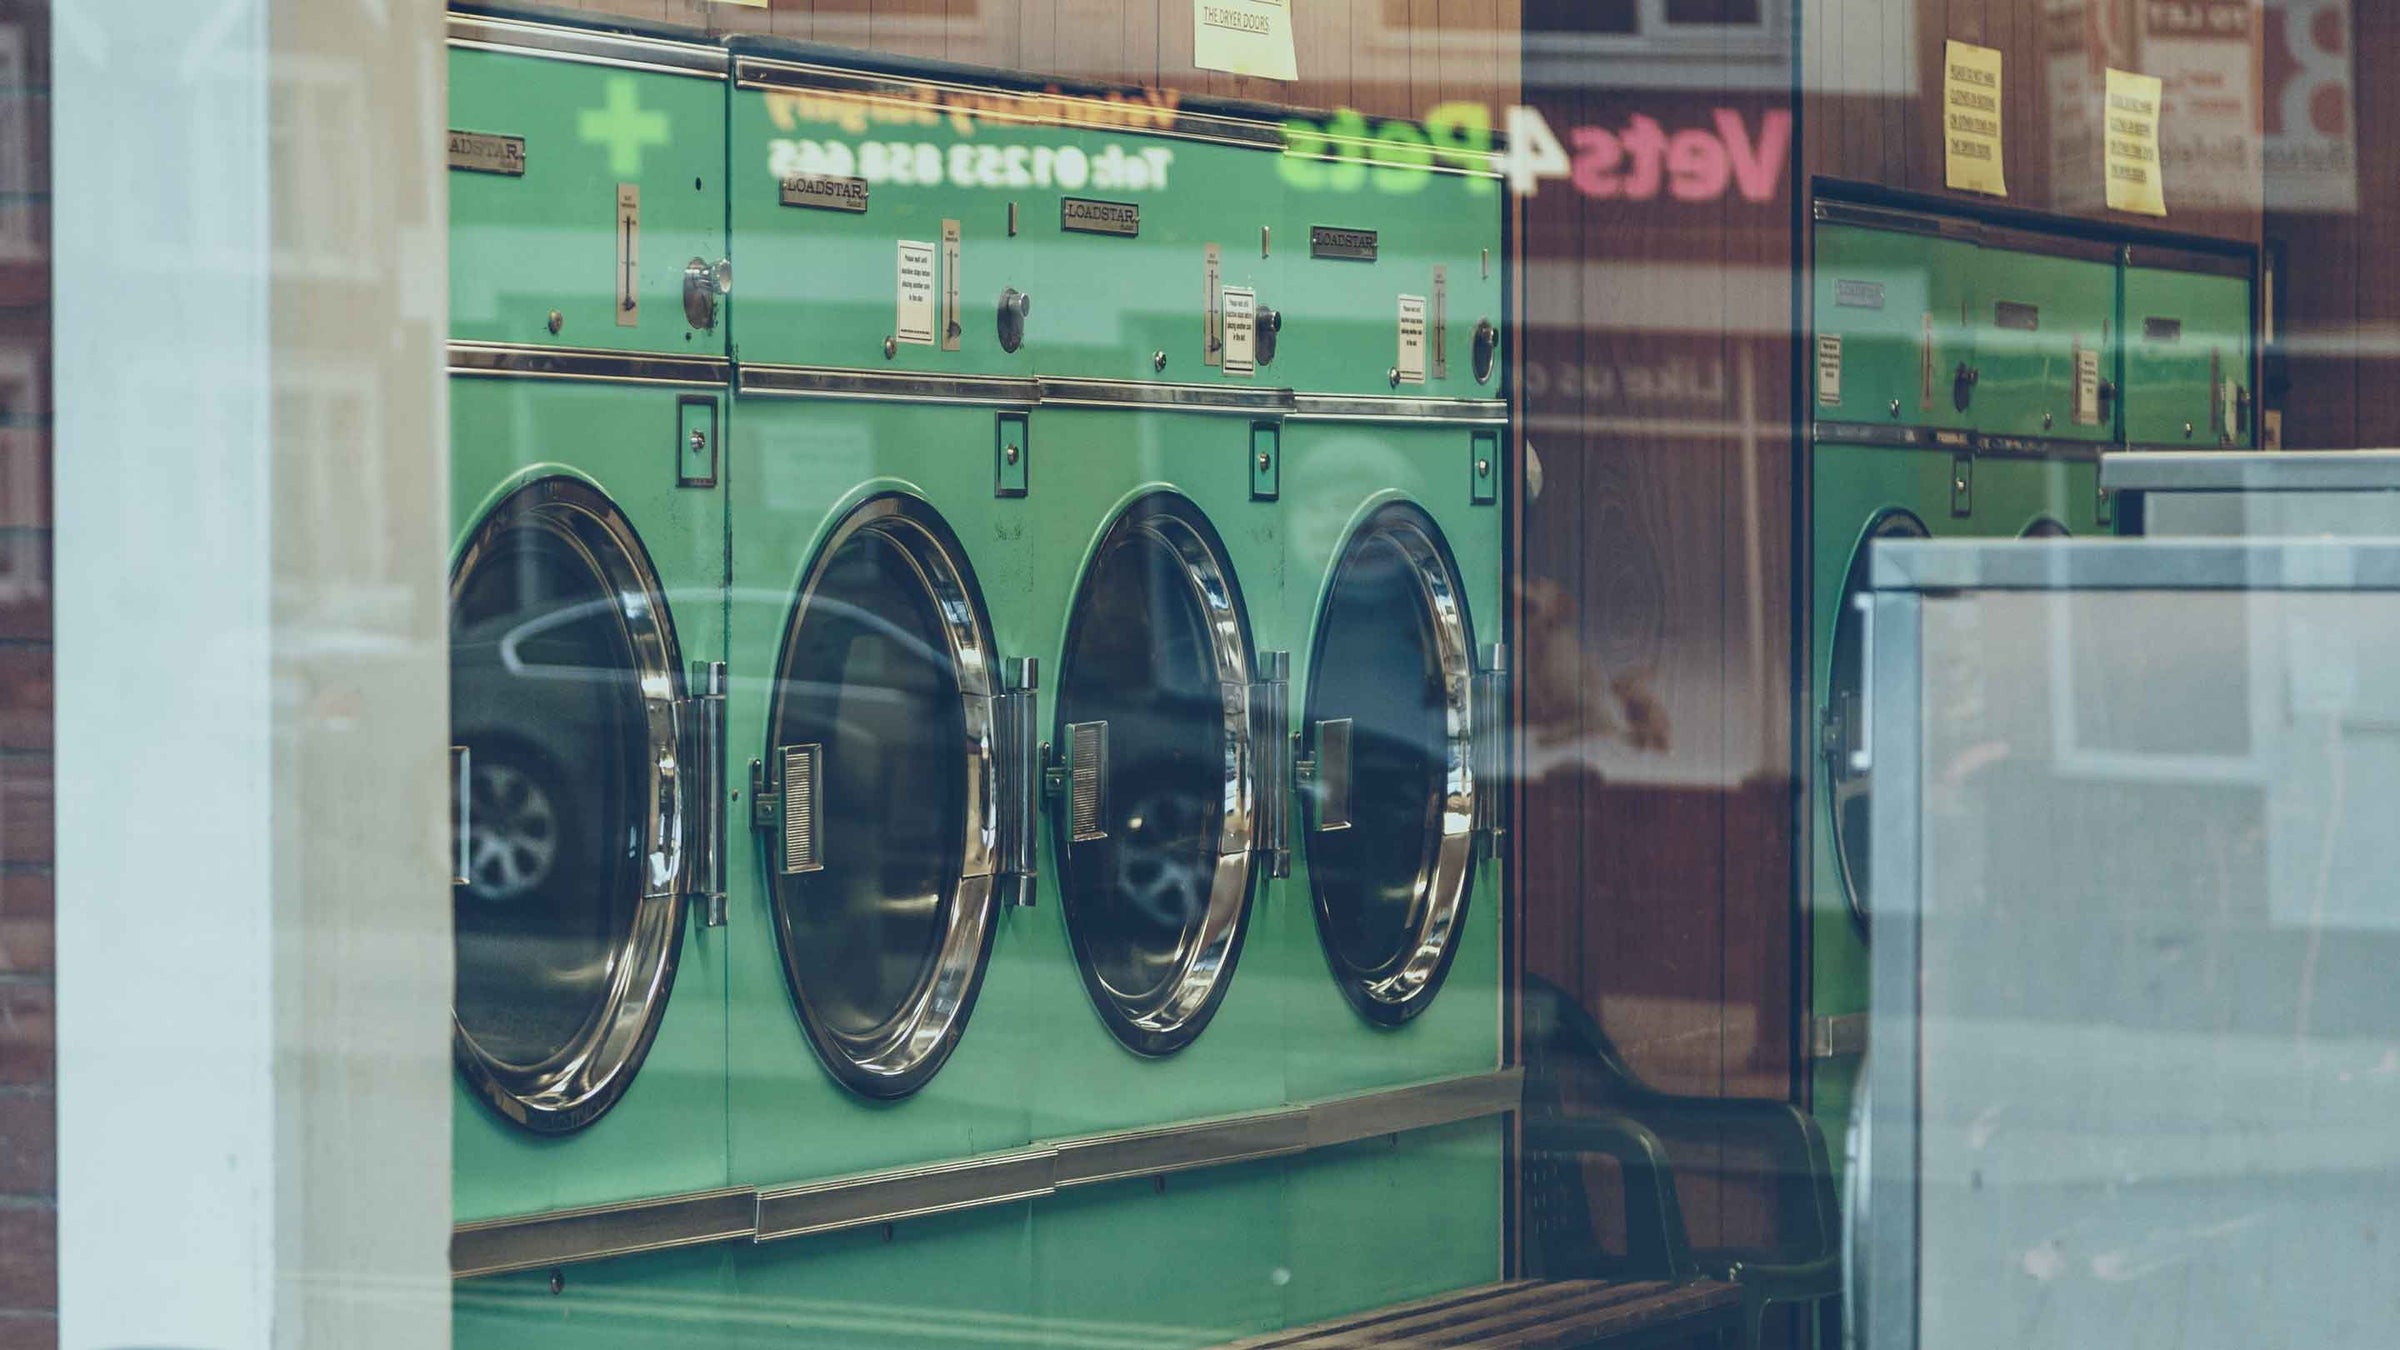 Washing machines in launderette window for garment care